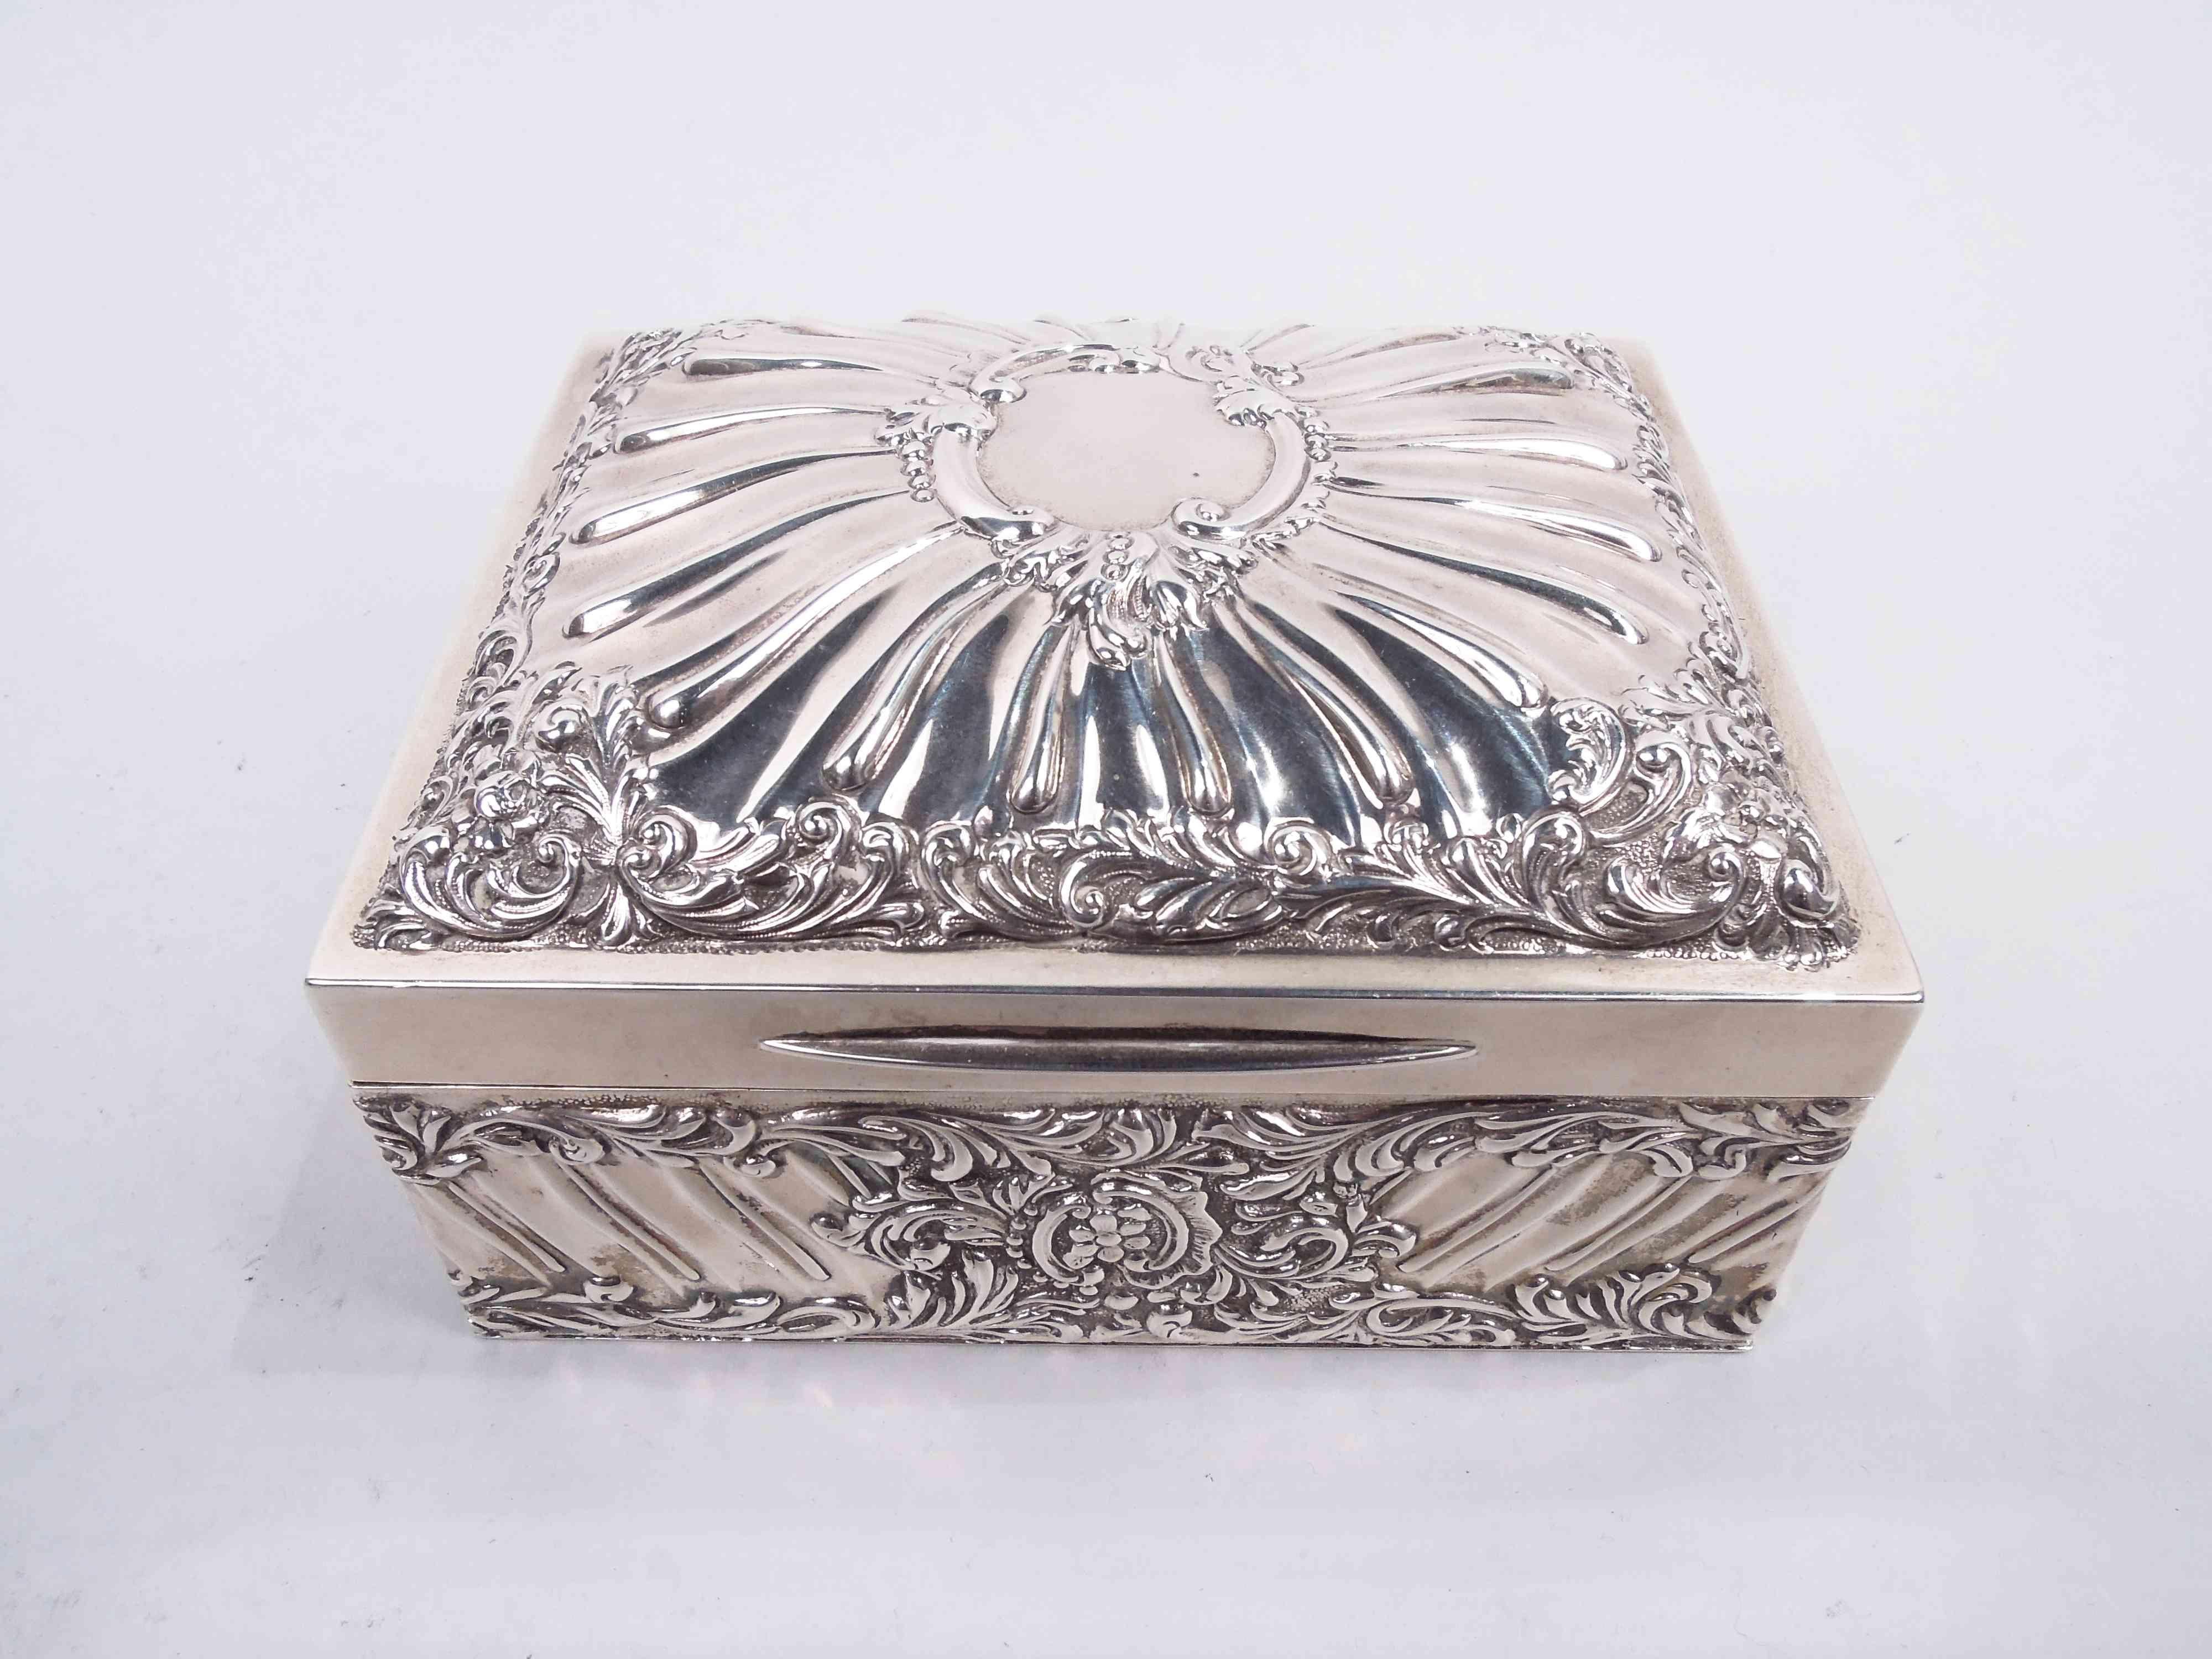 Edwardian Classical sterling silver jewelry box. Made by Goldsmiths & Silversmiths Co. Ltd in London in 1904. Rectangular; cover hinged and tabbed with curved top. Chased leaf and flower borders with twisted fluting. Cover top has central leafing